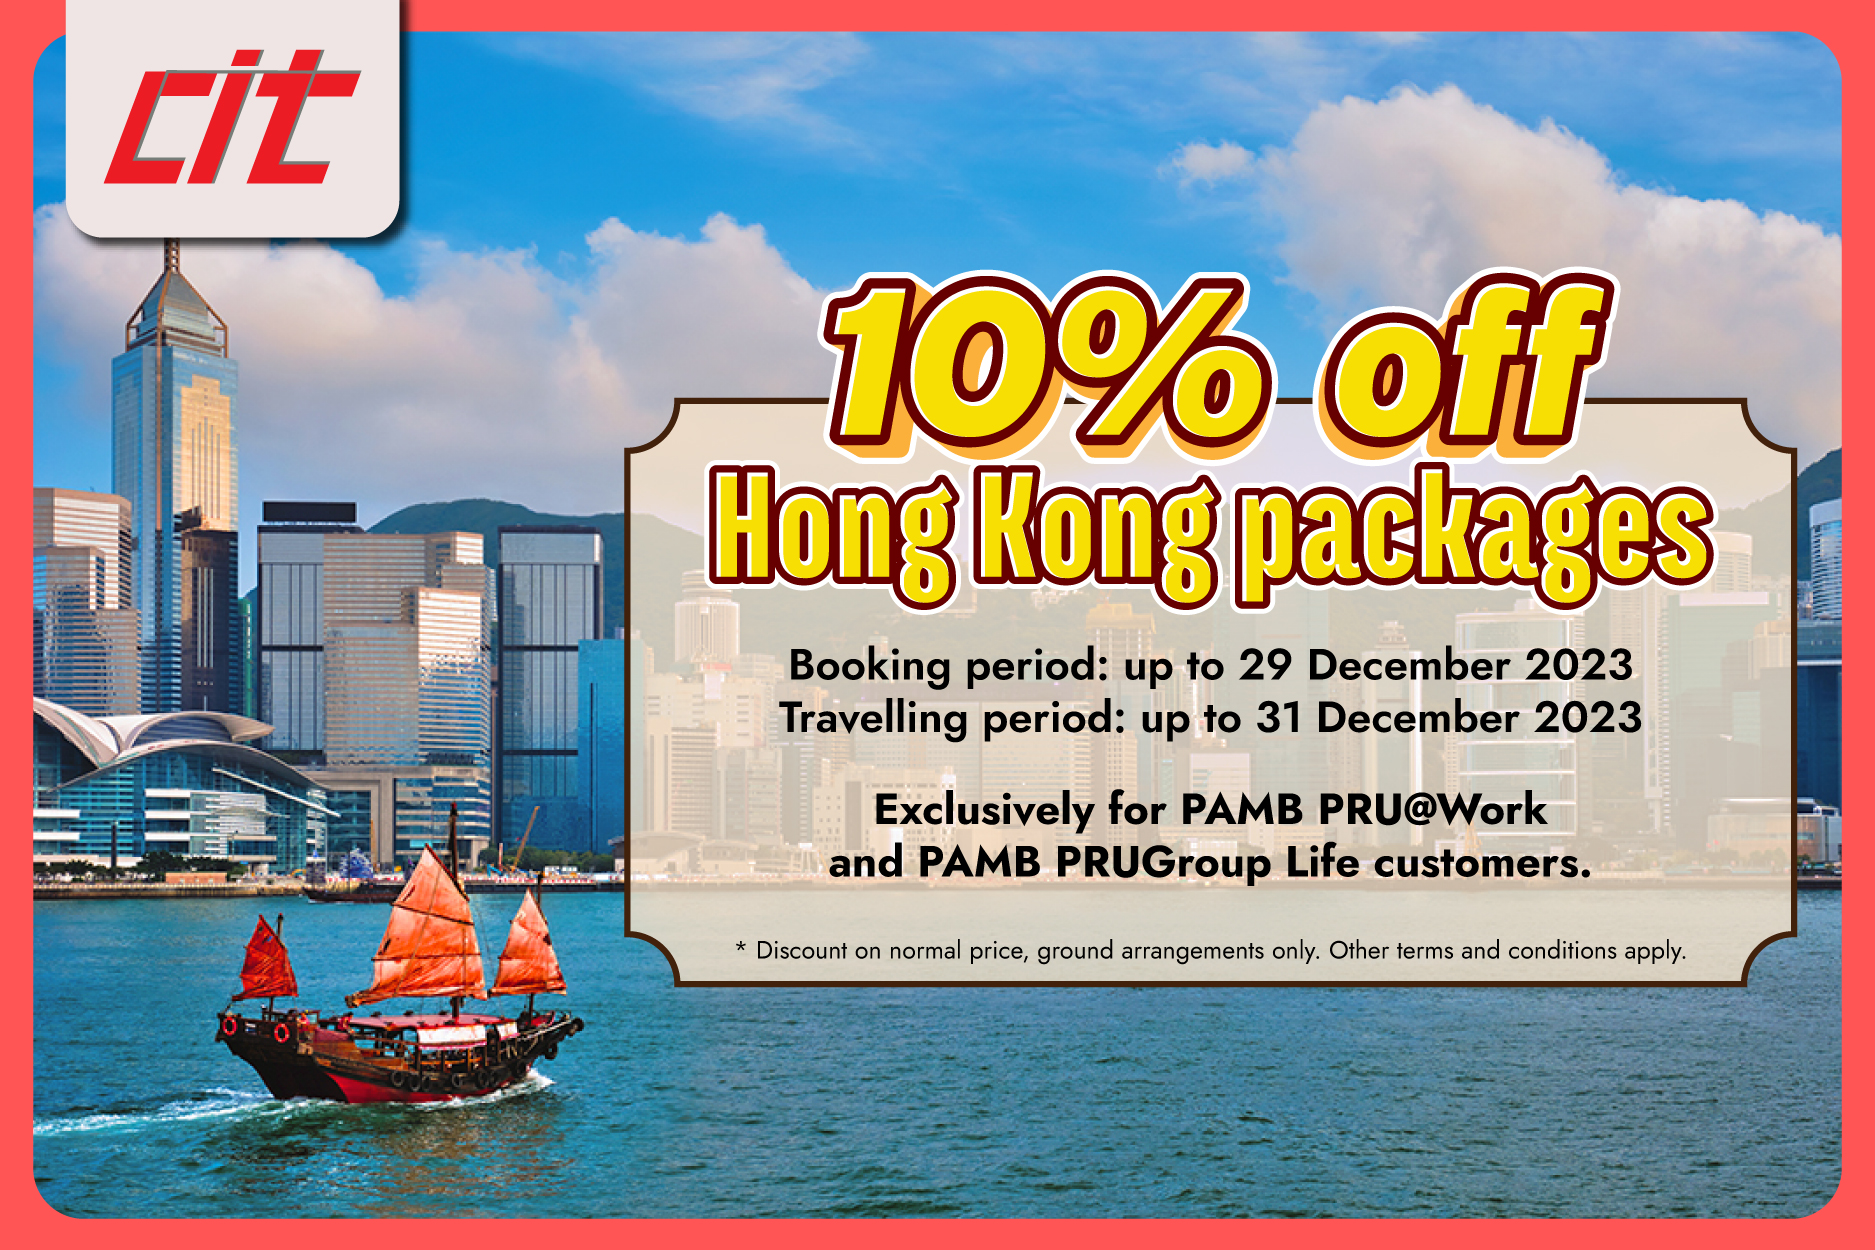 10% off Hong Kong packages